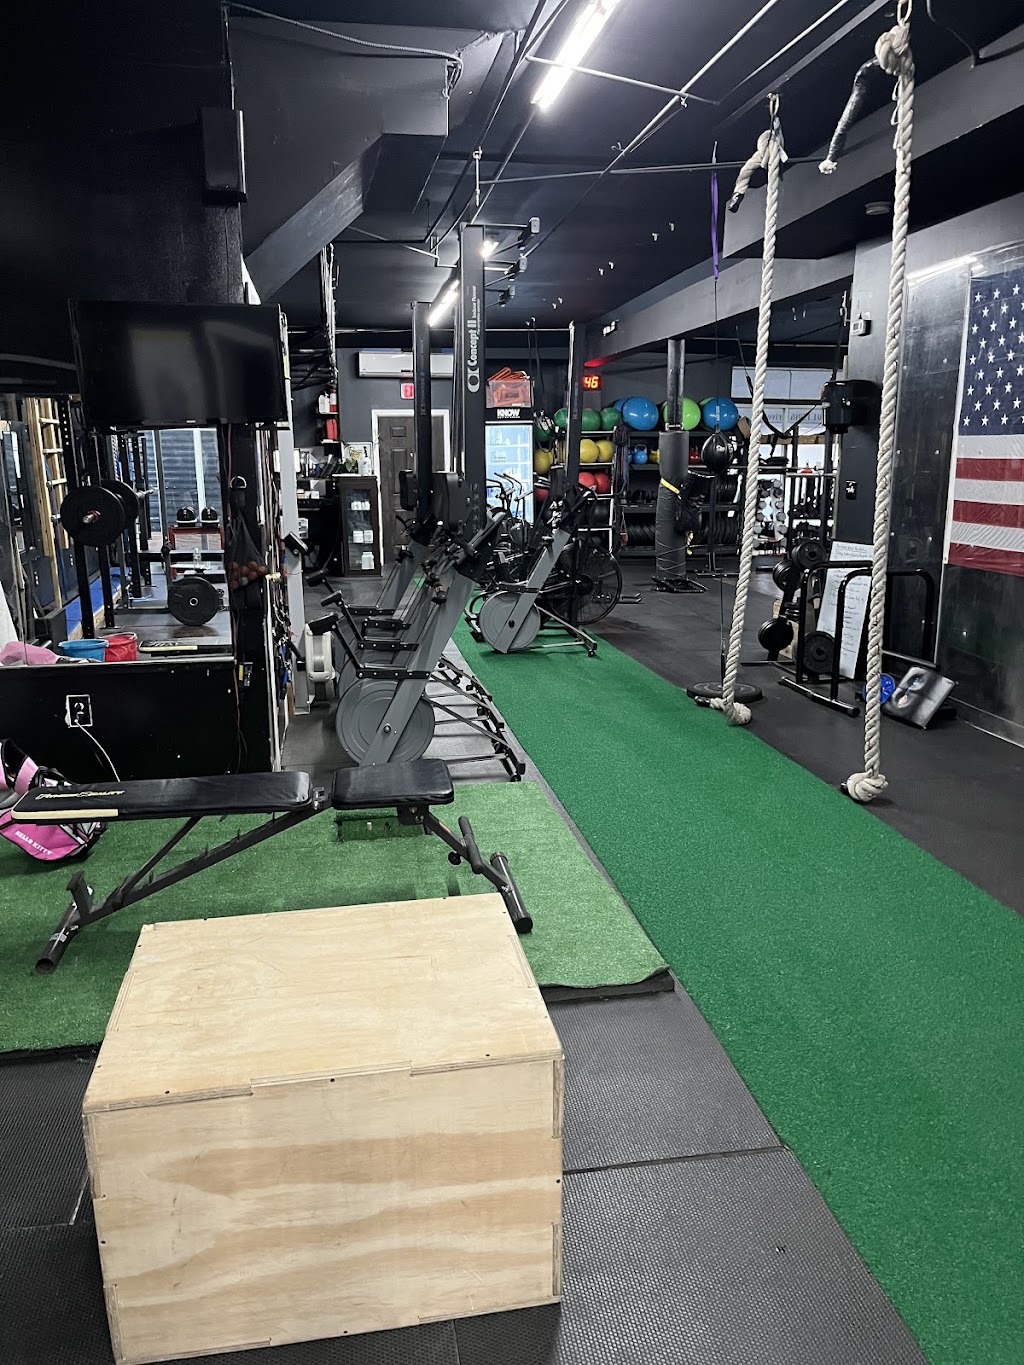 Stormborn Strength & Fitness | 102-01 159th Dr, Queens, NY 11414 | Phone: (718) 644-8463